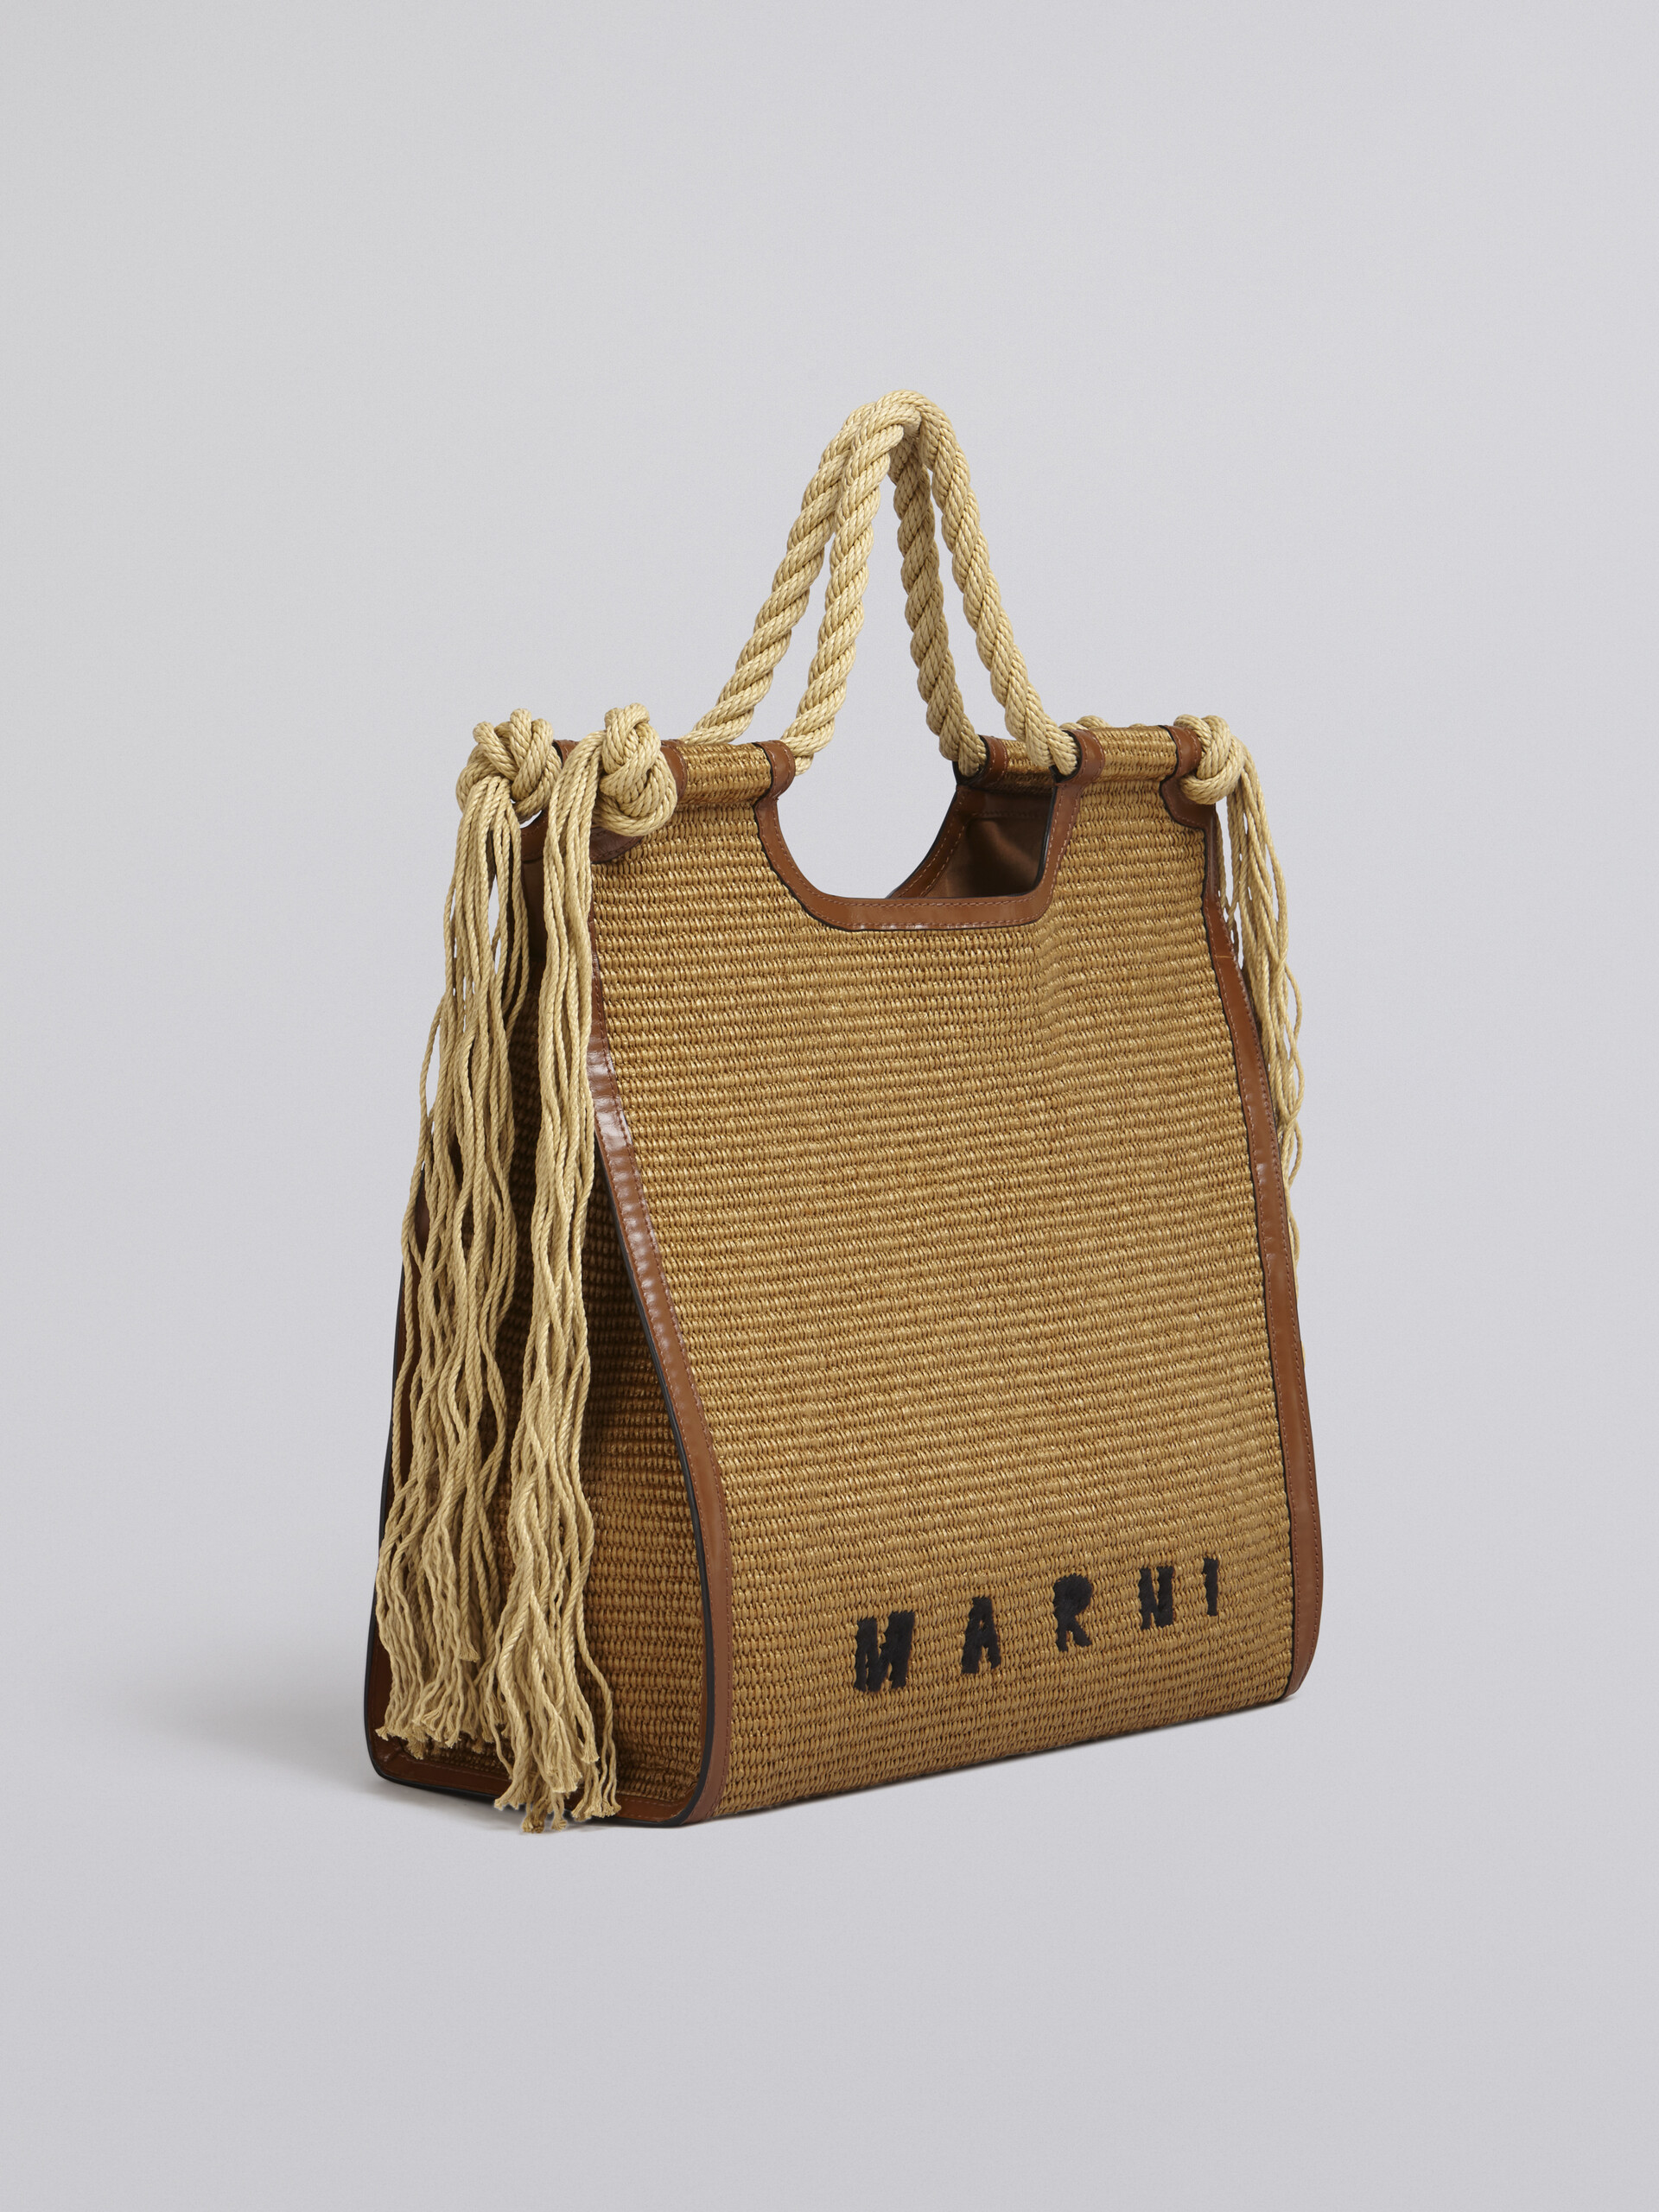 Marcel summer bag in brown leather and raffia with rope handles - Handbags - Image 5